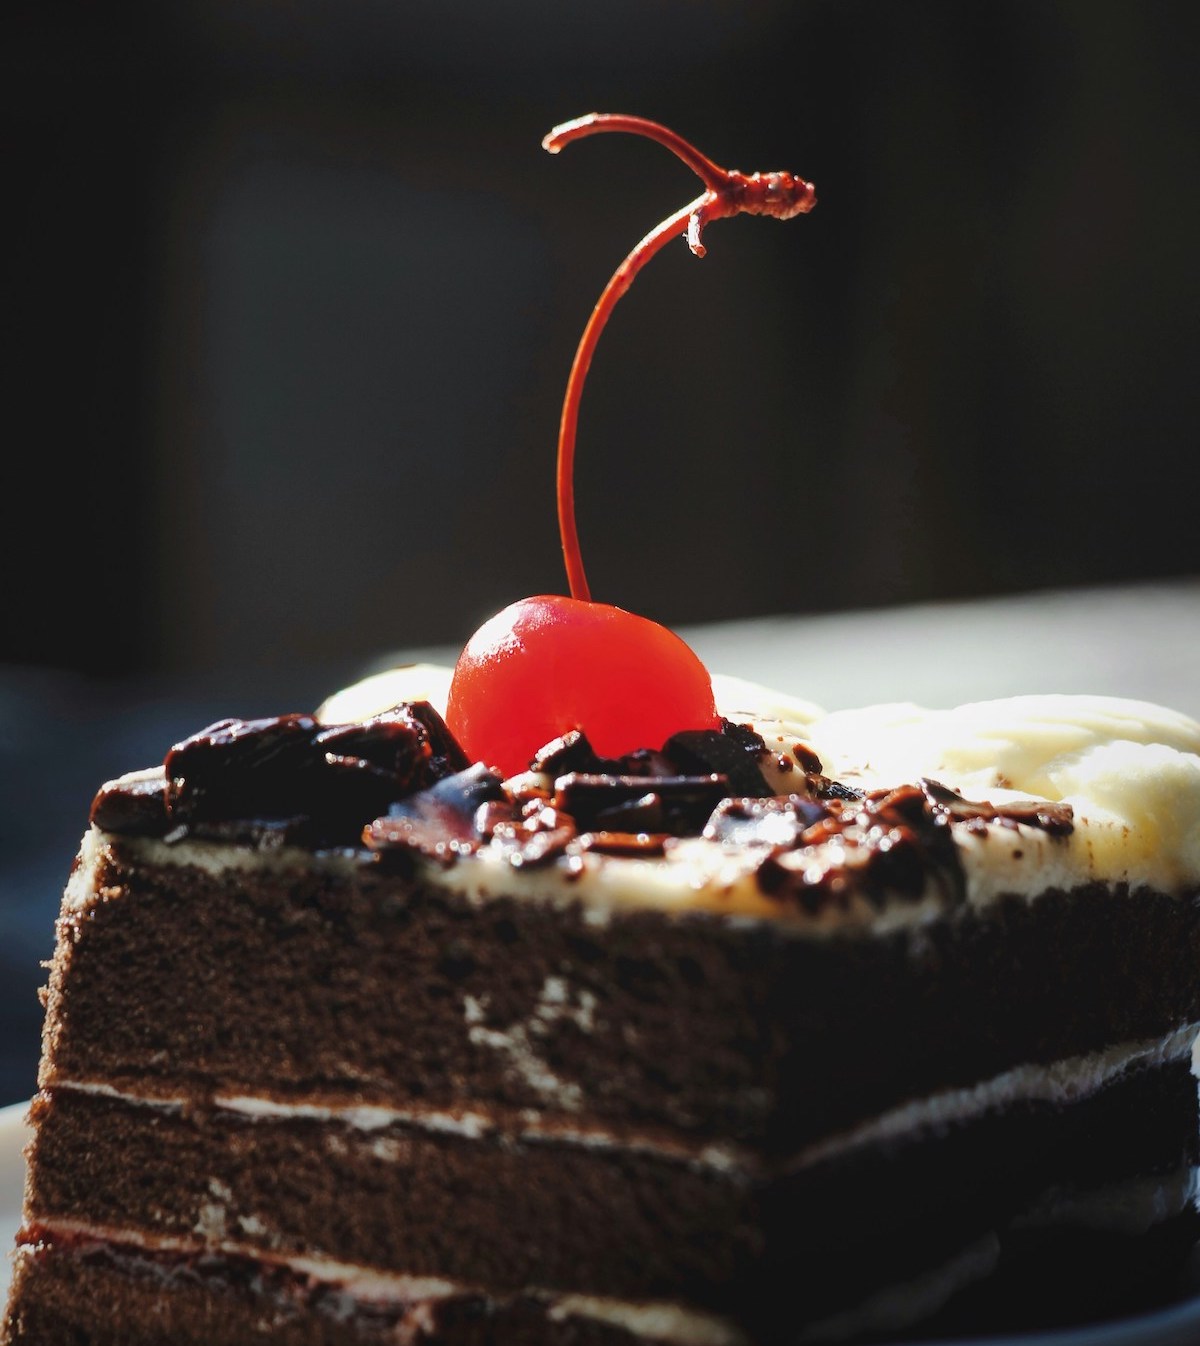 Germany is the only export destination for Black Forest cake